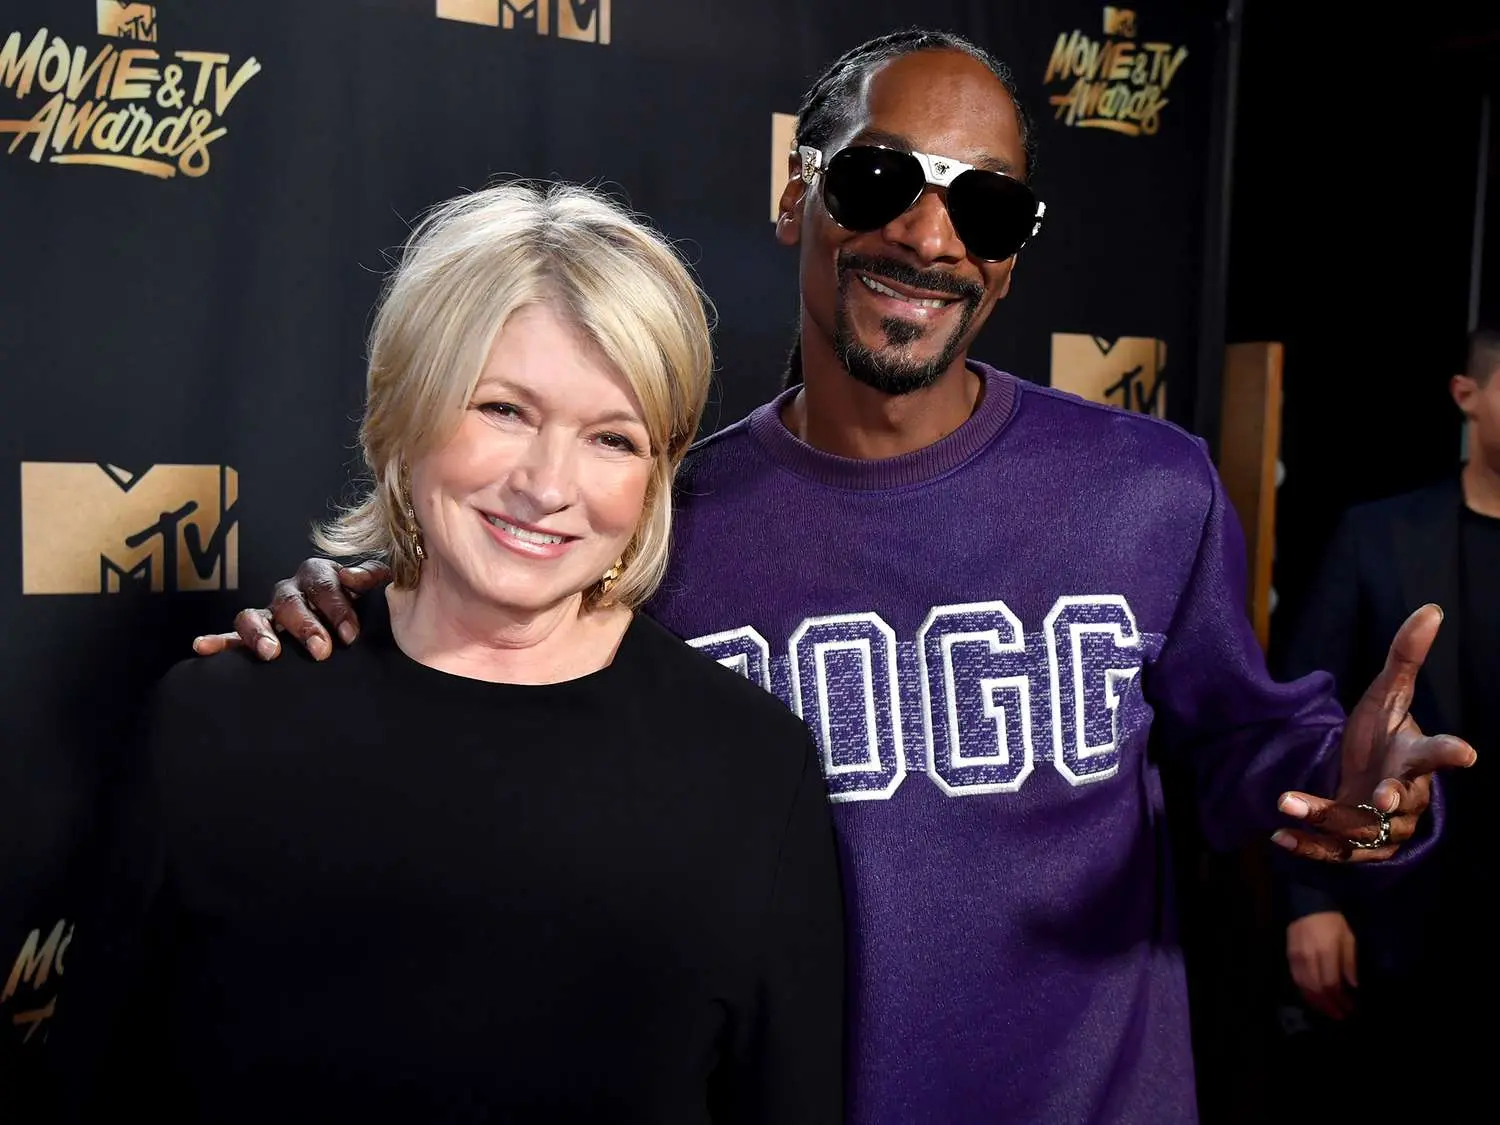 snoop dogg says only one person out smoked him - How did Snoop Dogg and Martha Stewart meet